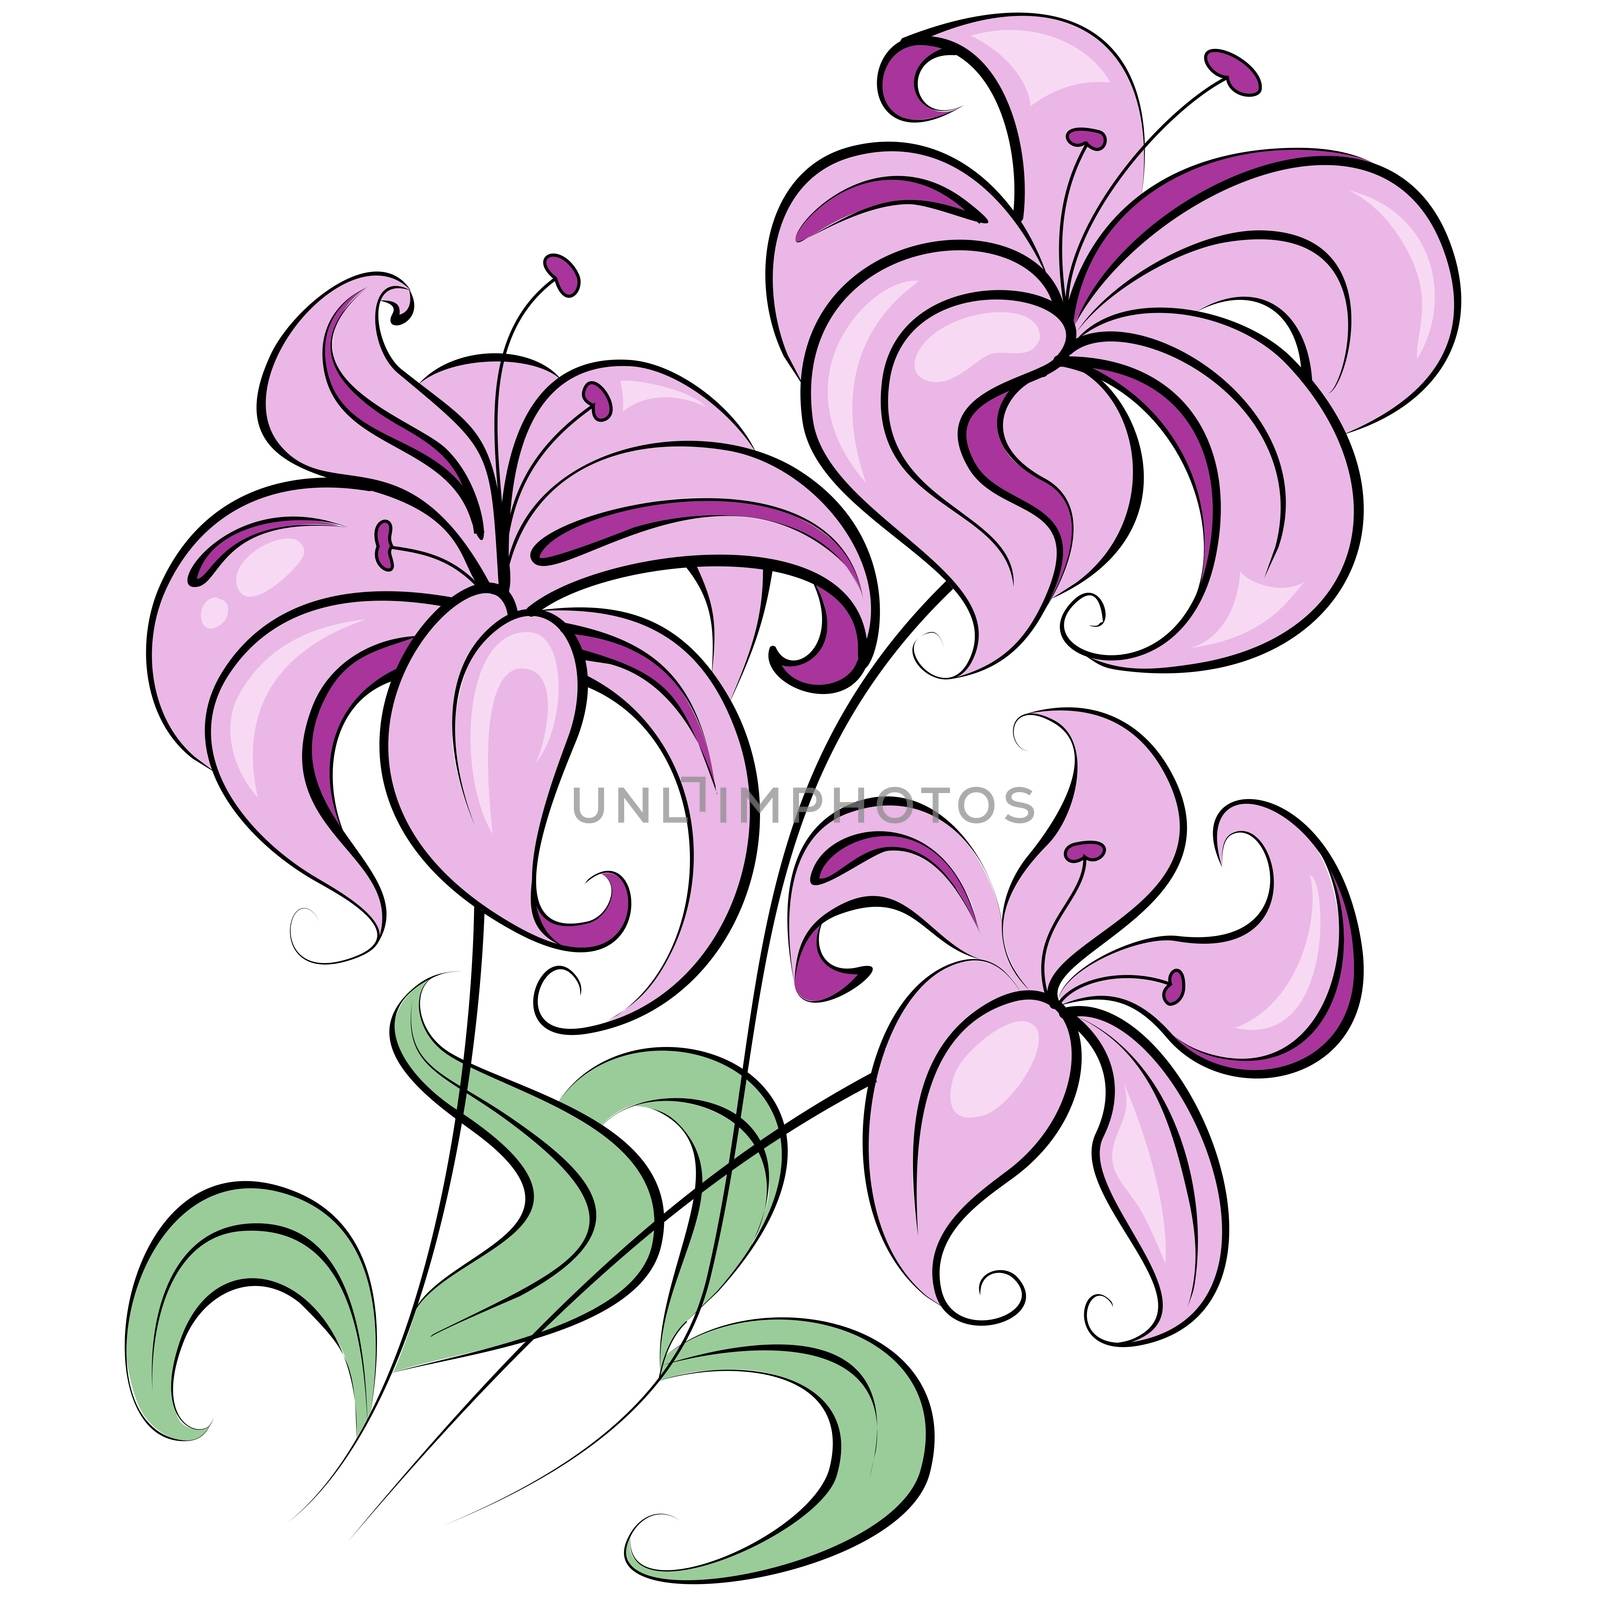 Illustration - stylized bouquet of flowers similar to lily